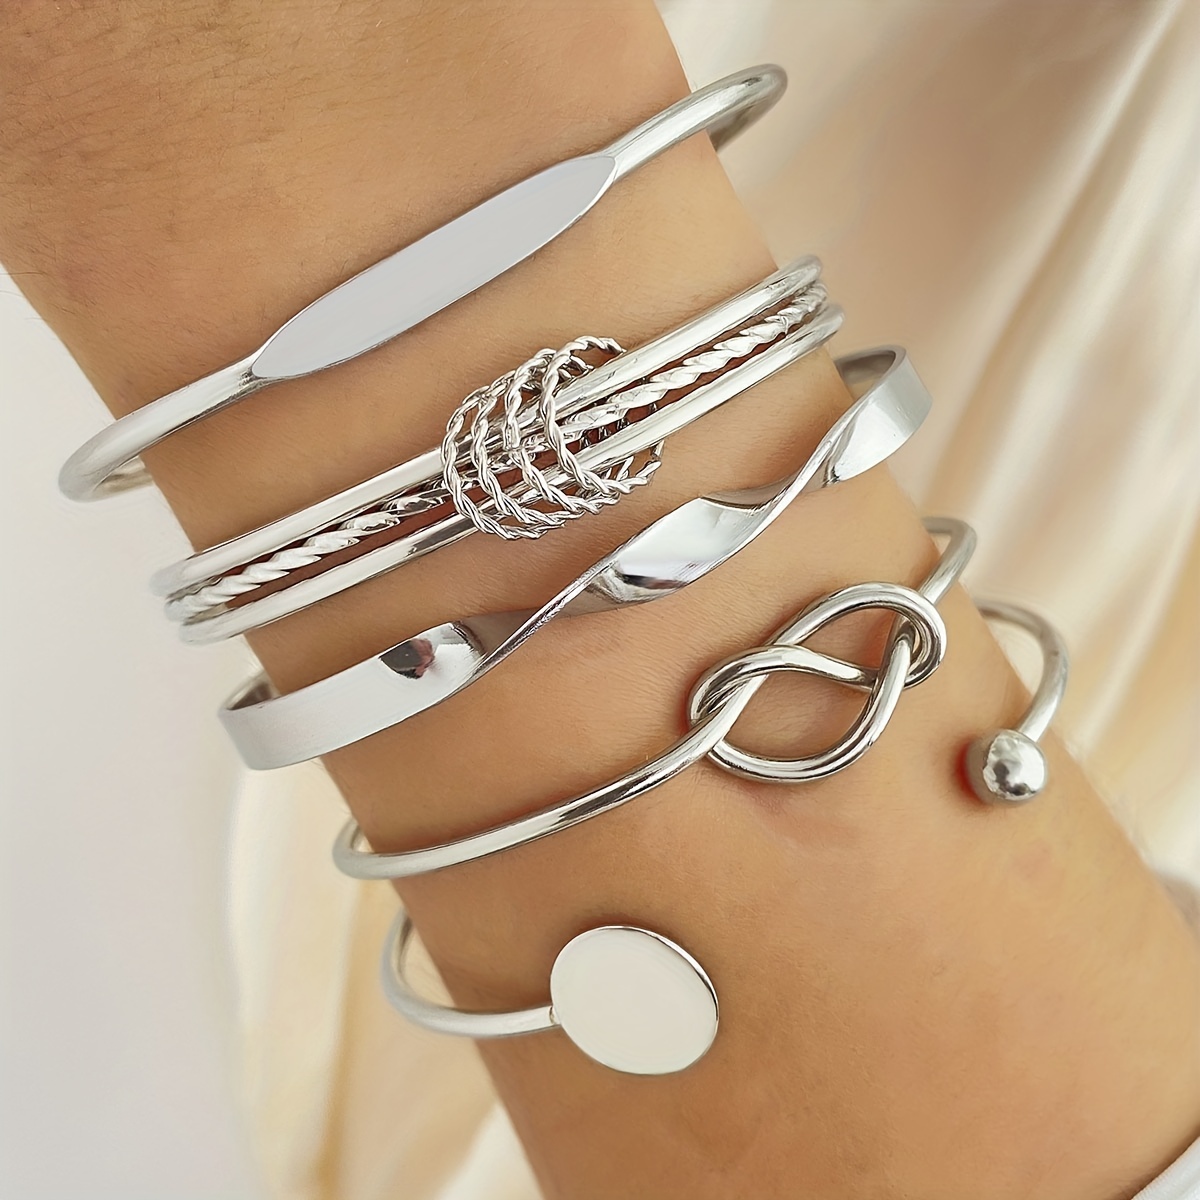 

5pcs/set Exquisite Knotted Round Piece Creative Silver Color Cuff Bangle Bracelet Hand Jewelry Ornament